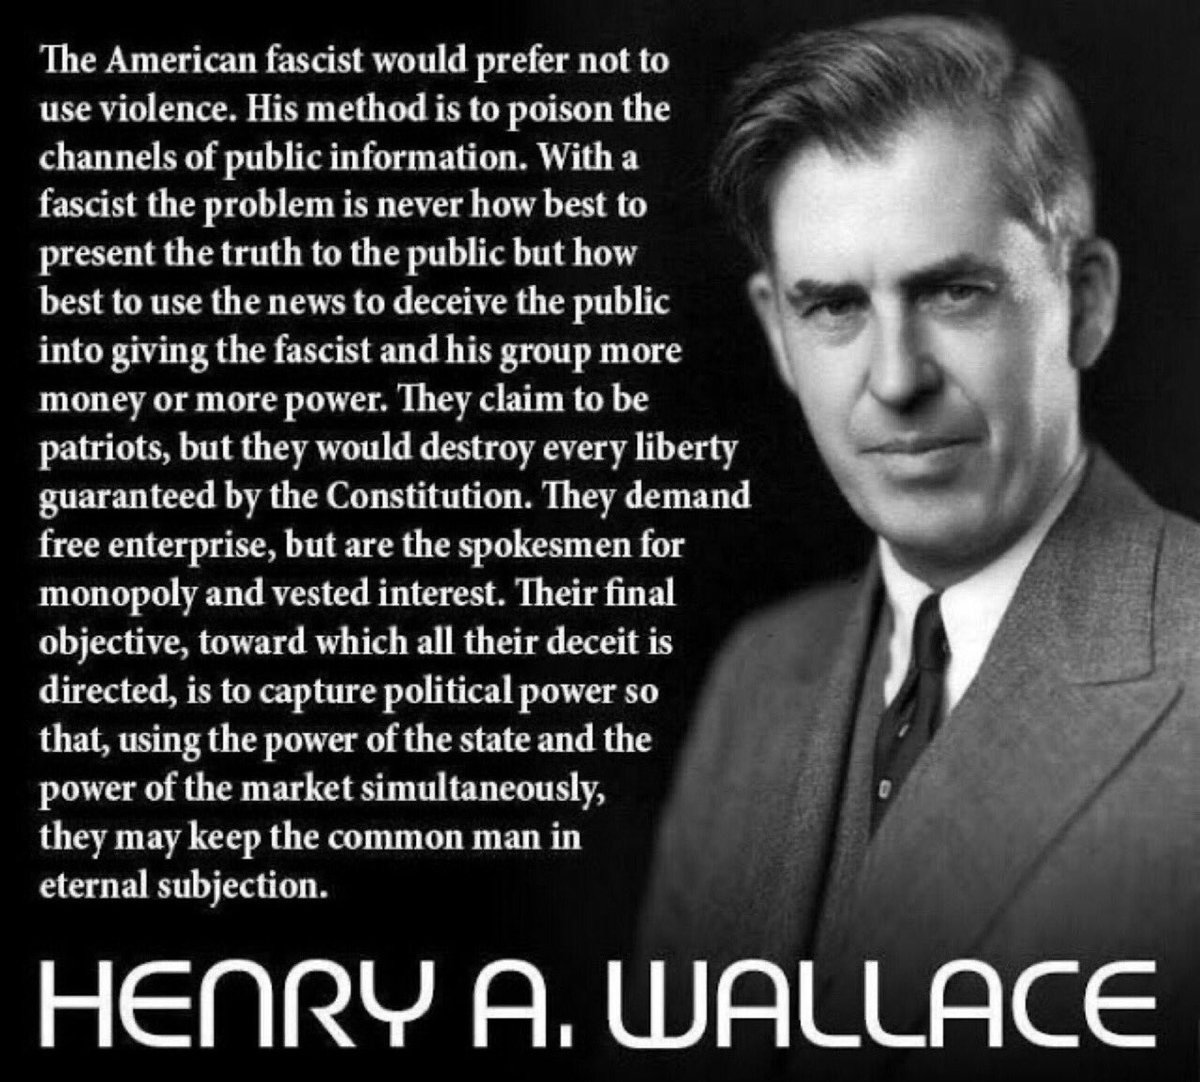 @LauraMiers Coming on the heels of the Senate passing the updated FISA Section 702 we’re looking at what Henry Wallace predicted in 1944